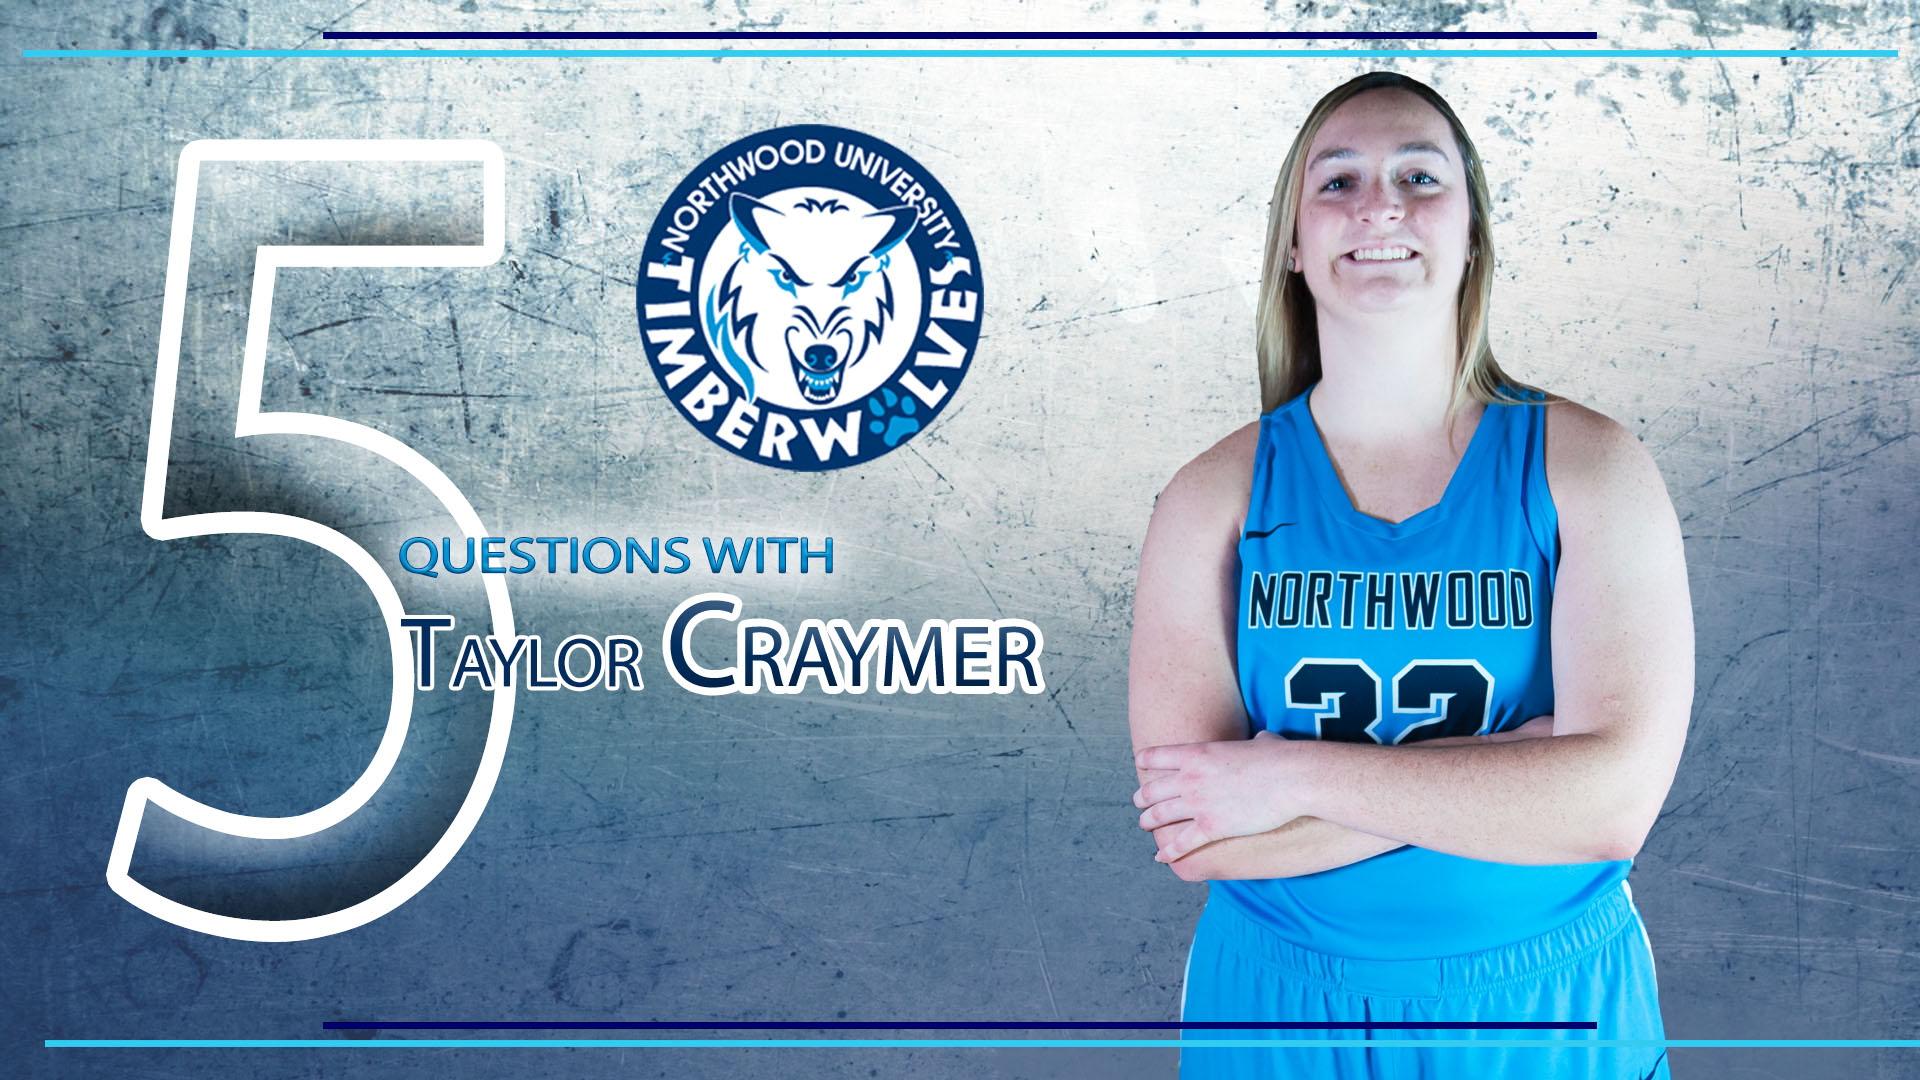 Northwood Athletics - 5 Questions with Taylor Craymer